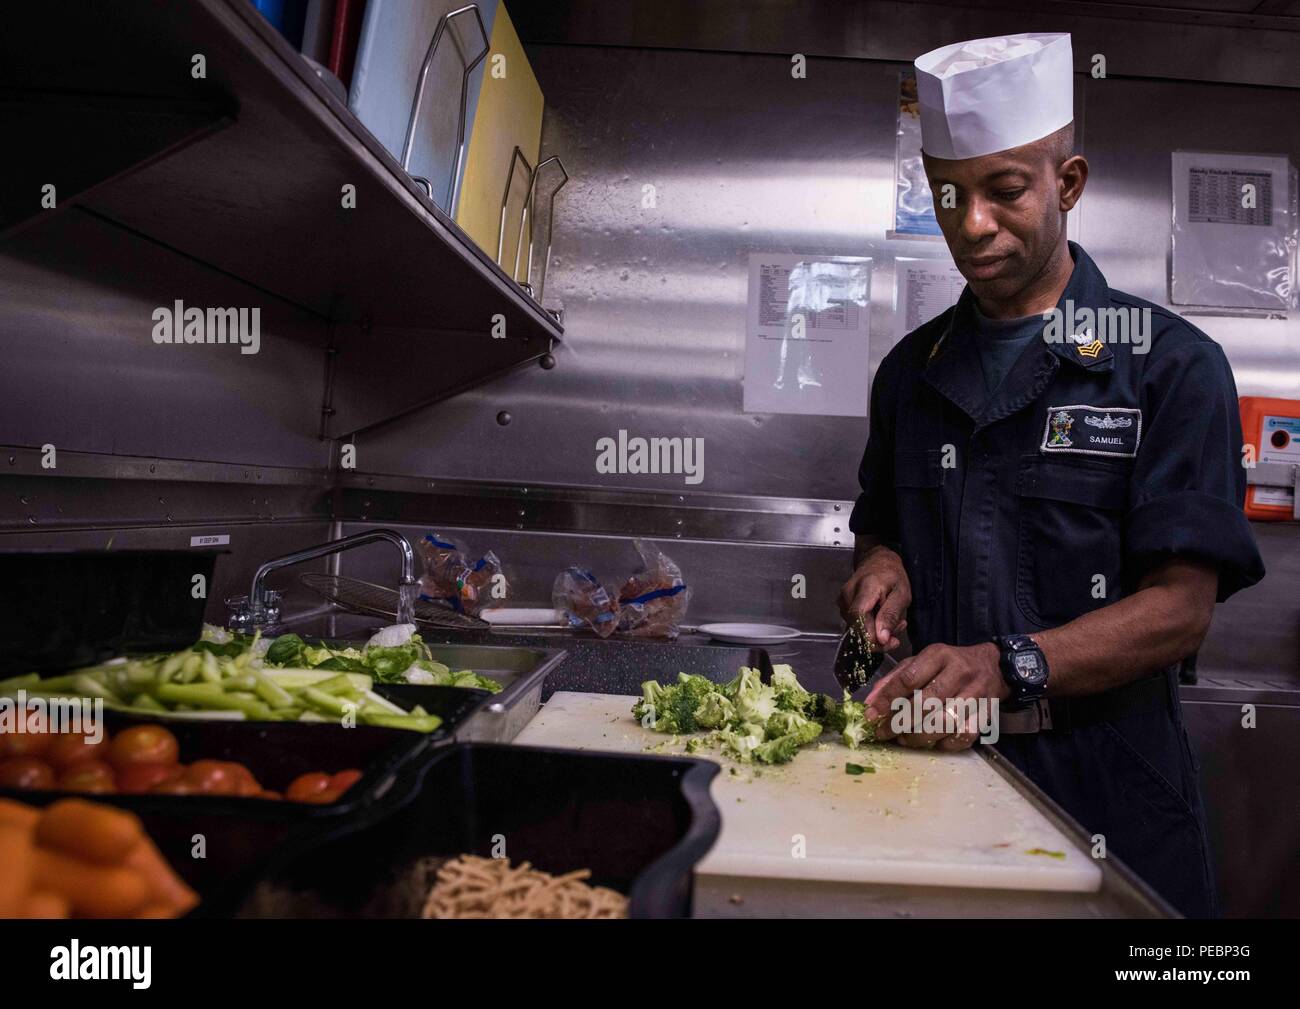 151204-N-WK391-051 PACIFIC OCEAN (Dec. 4, 2015) Culinary Specialist 1st Class Jonathan Samuel cuts broccoli for dinner aboard amphibious transport dock ship USS New Orleans (LPD 18), which is part of the Boxer Amphibious Ready Group (ARG). The Boxer ARG is off the coast of Southern California completing a certification exercise (CERTEX). CERTEX is the final evaluation of the 13th Marine Expeditionary Unit (13th MEU) and Boxer ARG prior to deployment and is intended to certify their readiness to conduct integrated missions across the full spectrum of military operations. (U.S. Navy photo by Mas Stock Photo